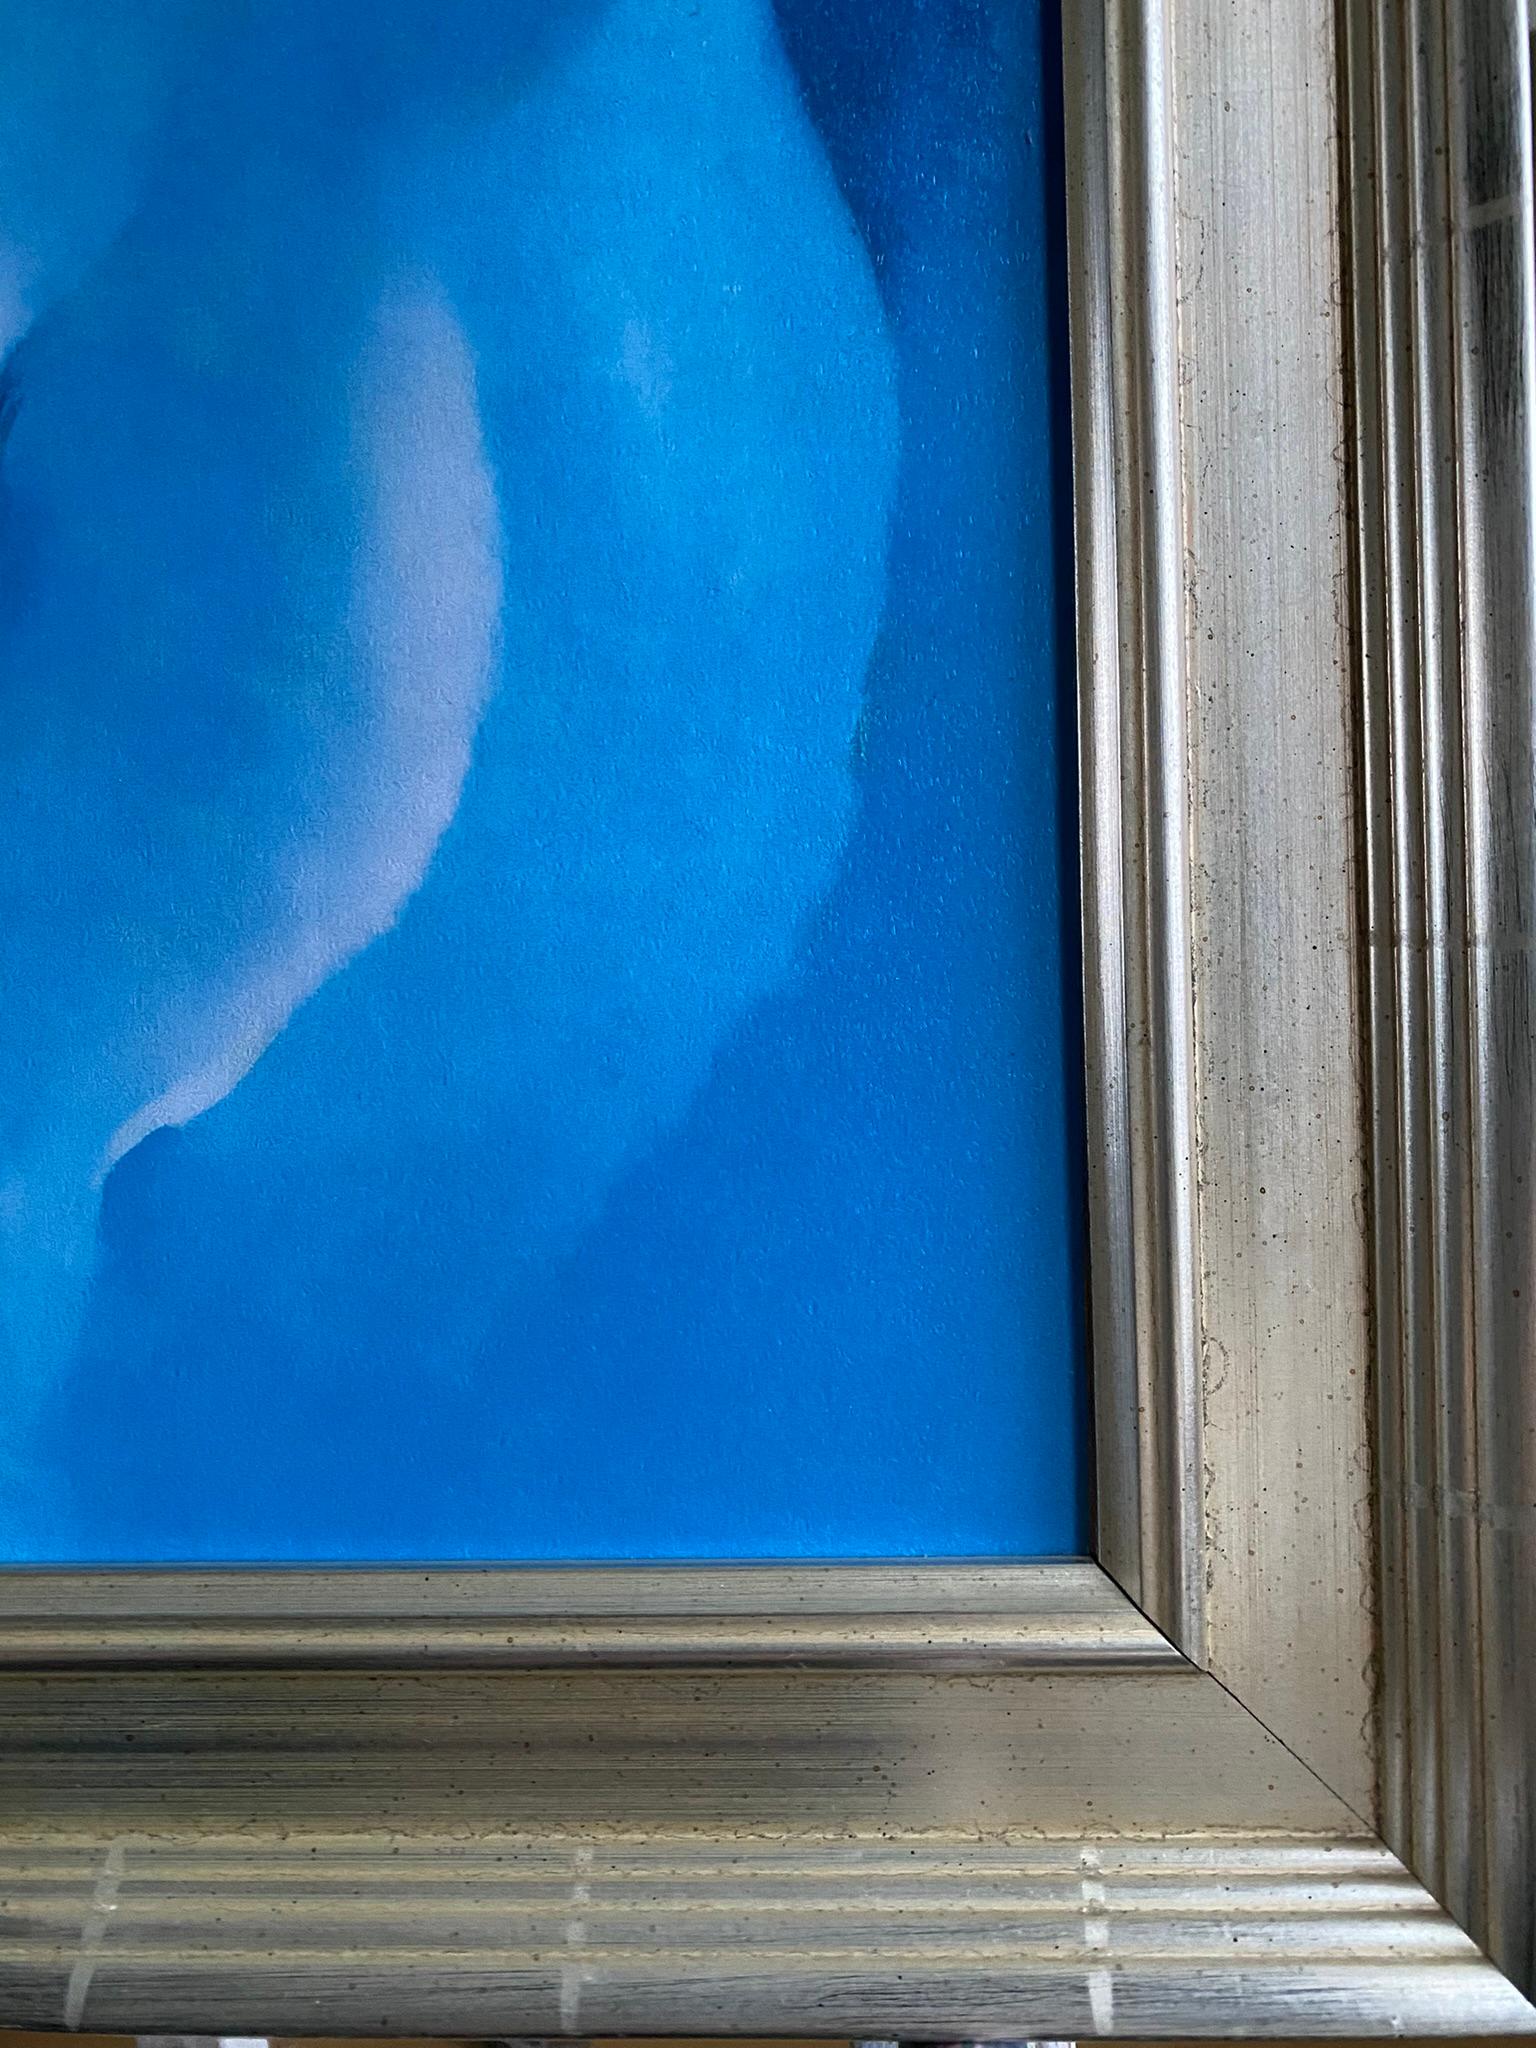 Georgia O'Keeffe-High Quality print by MoMA circa1997-Abstraction Blue-GSYStudio For Sale 14